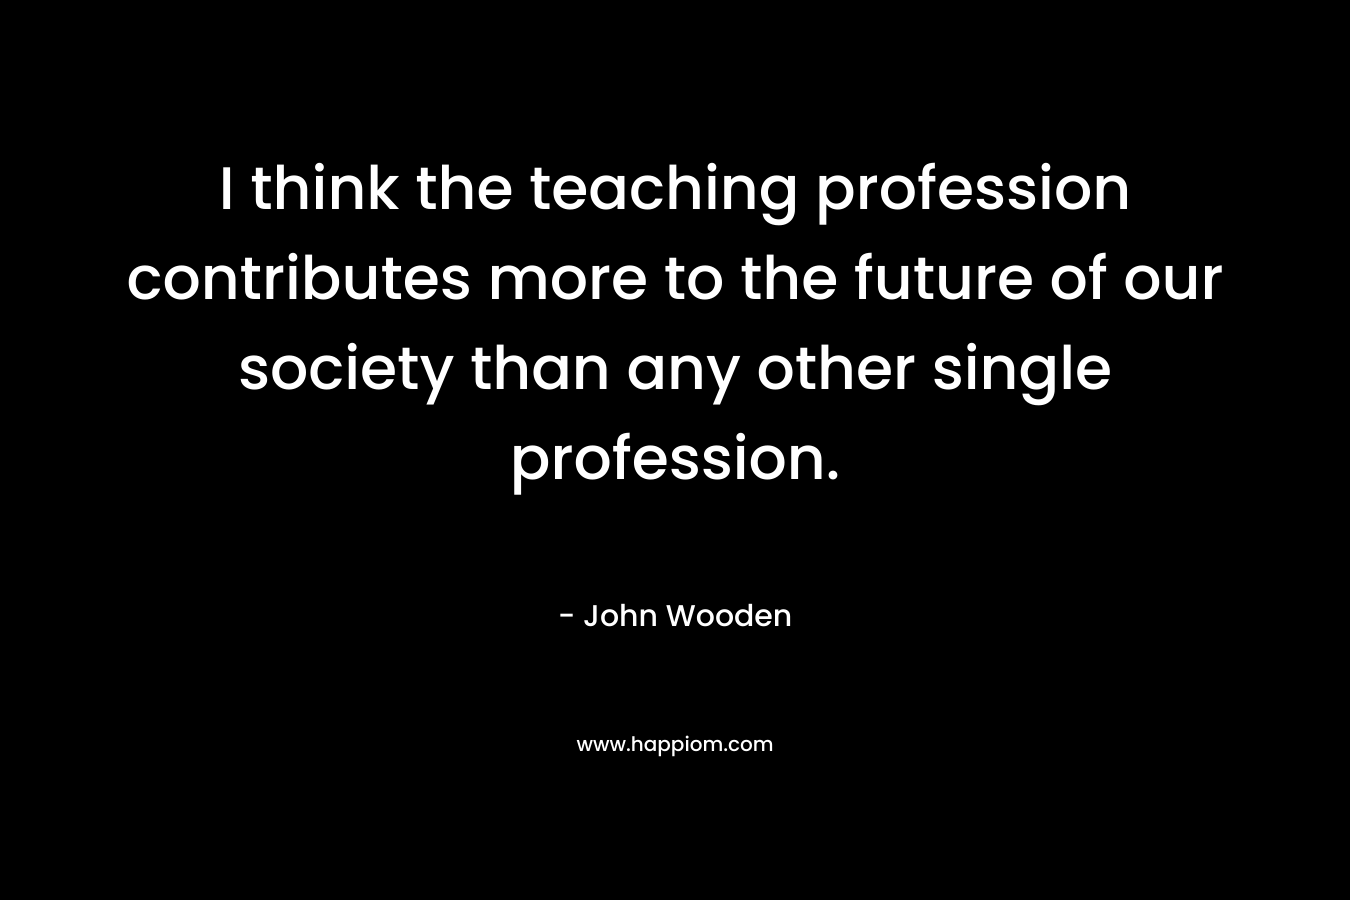 I think the teaching profession contributes more to the future of our society than any other single profession. – John Wooden